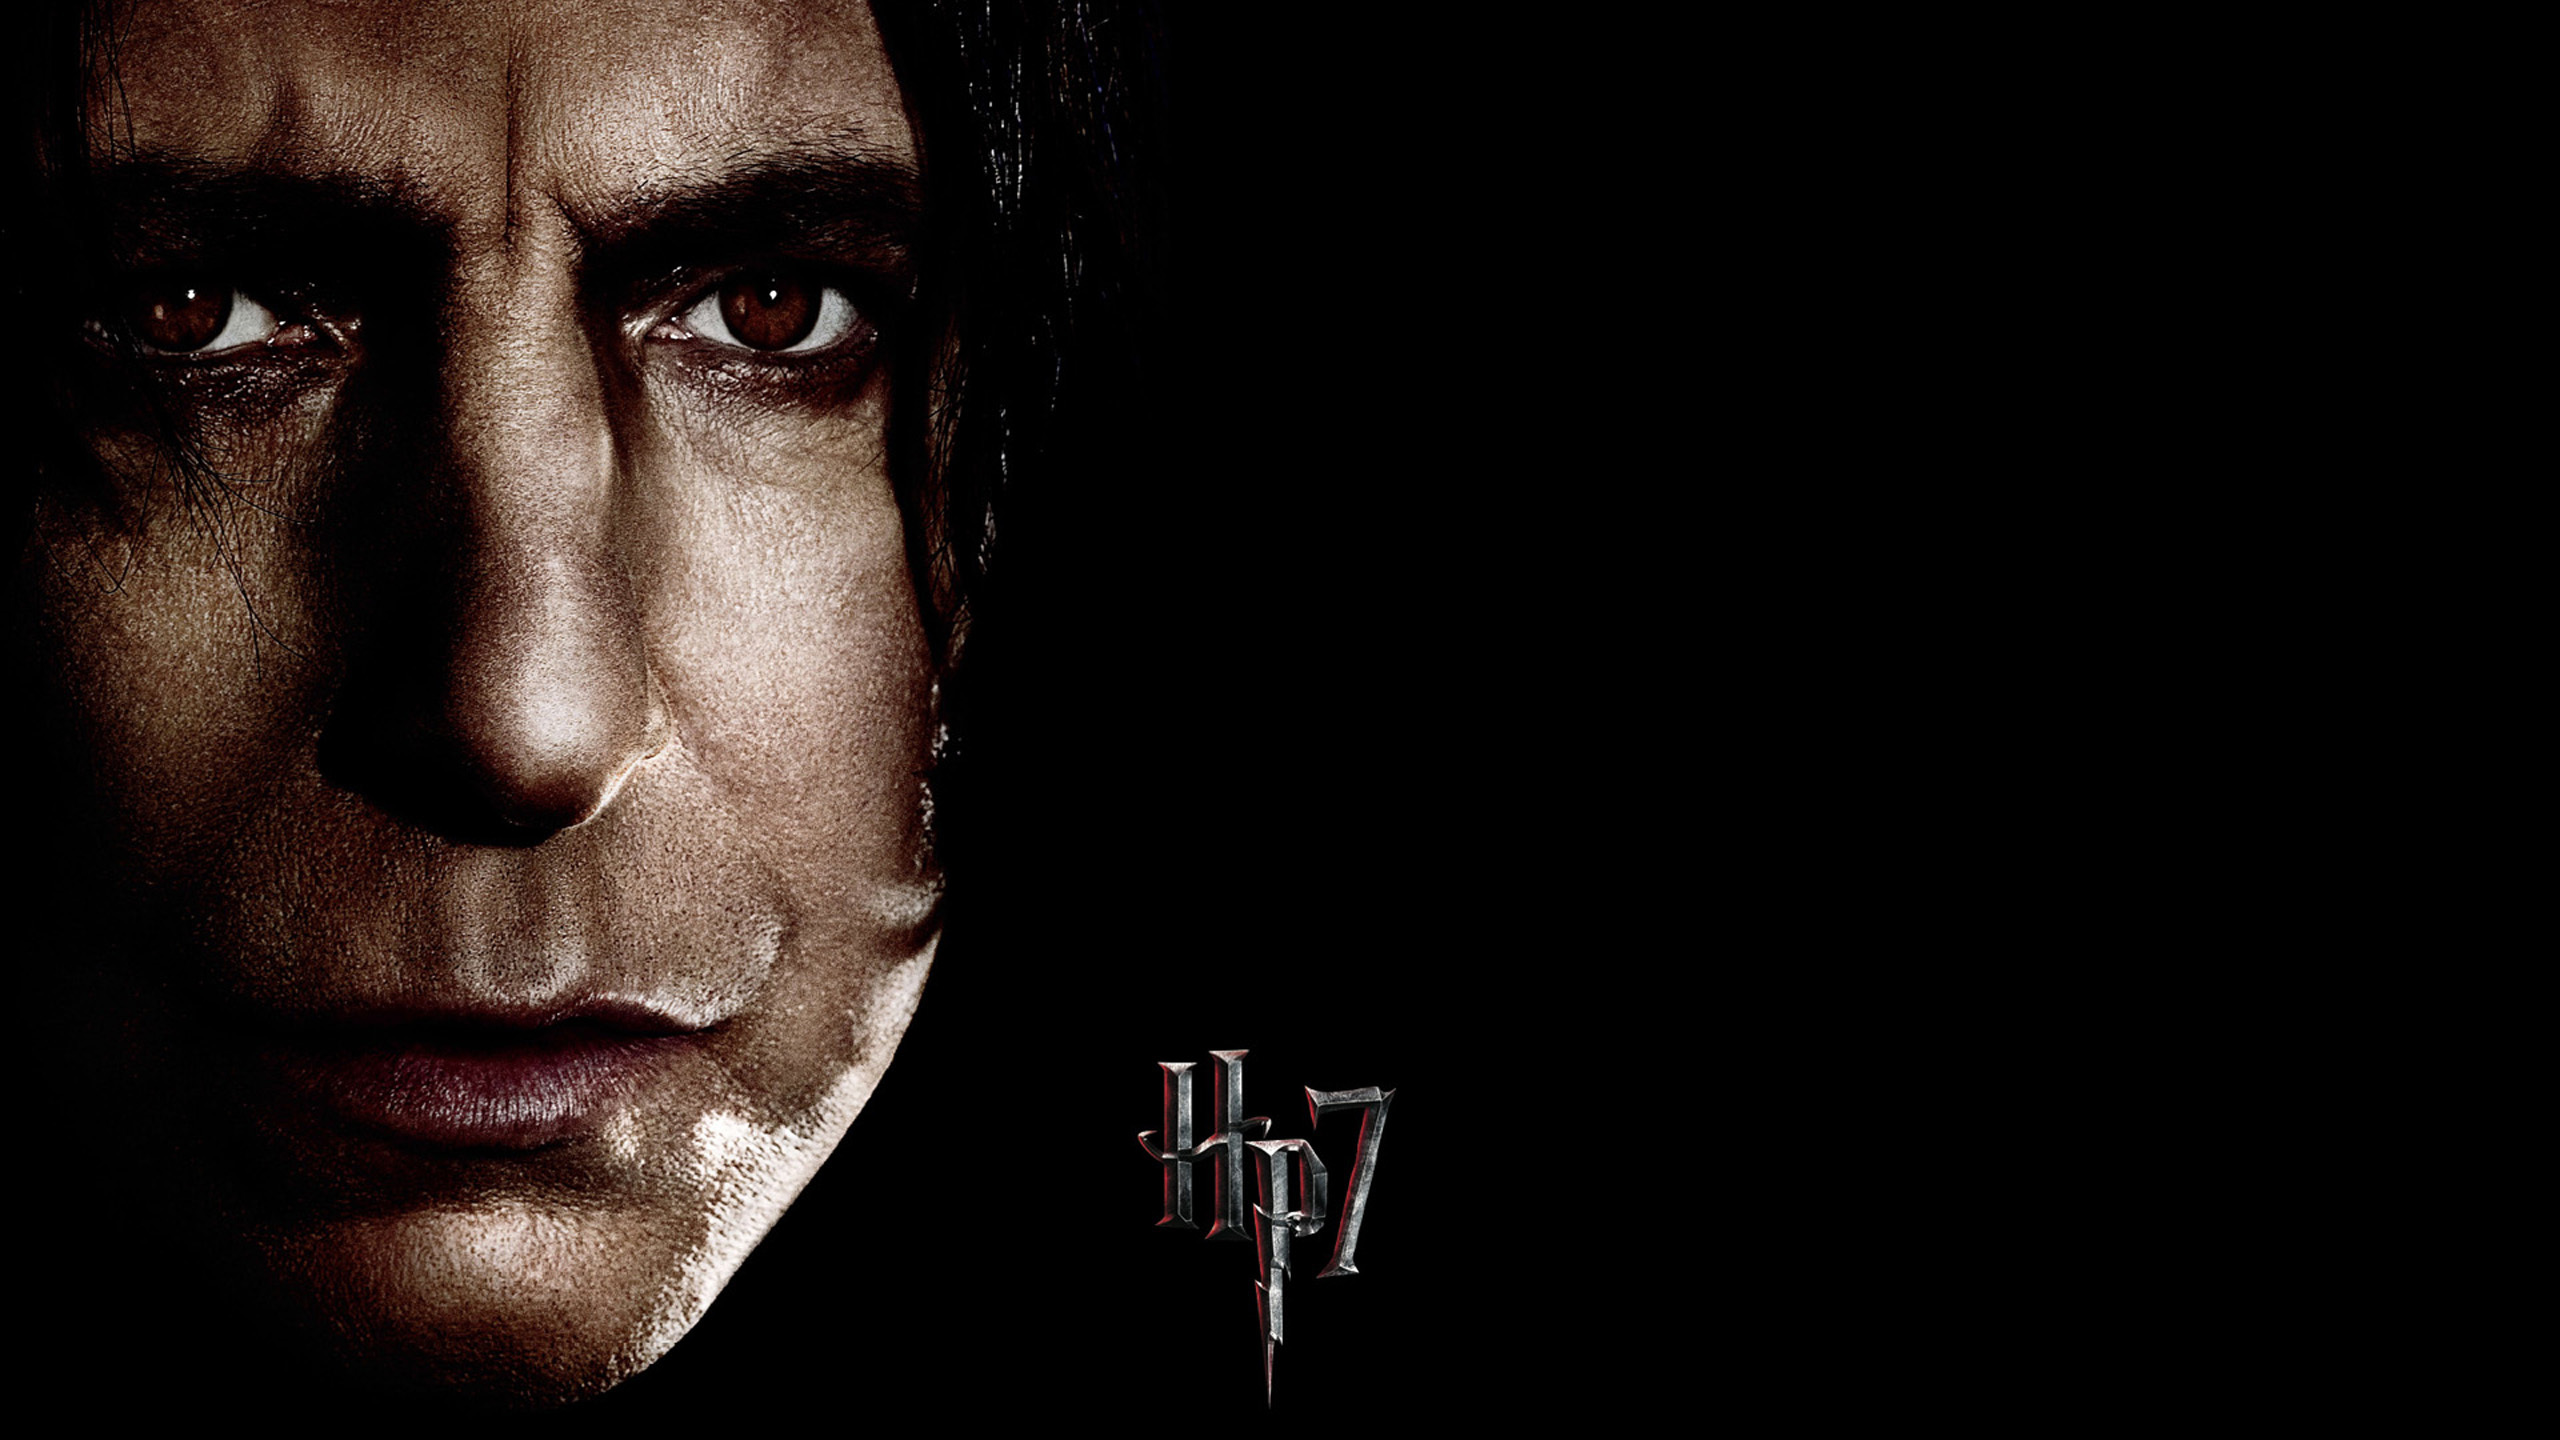 Harry Potter Part 1 Character Poster - HD Wallpaper 